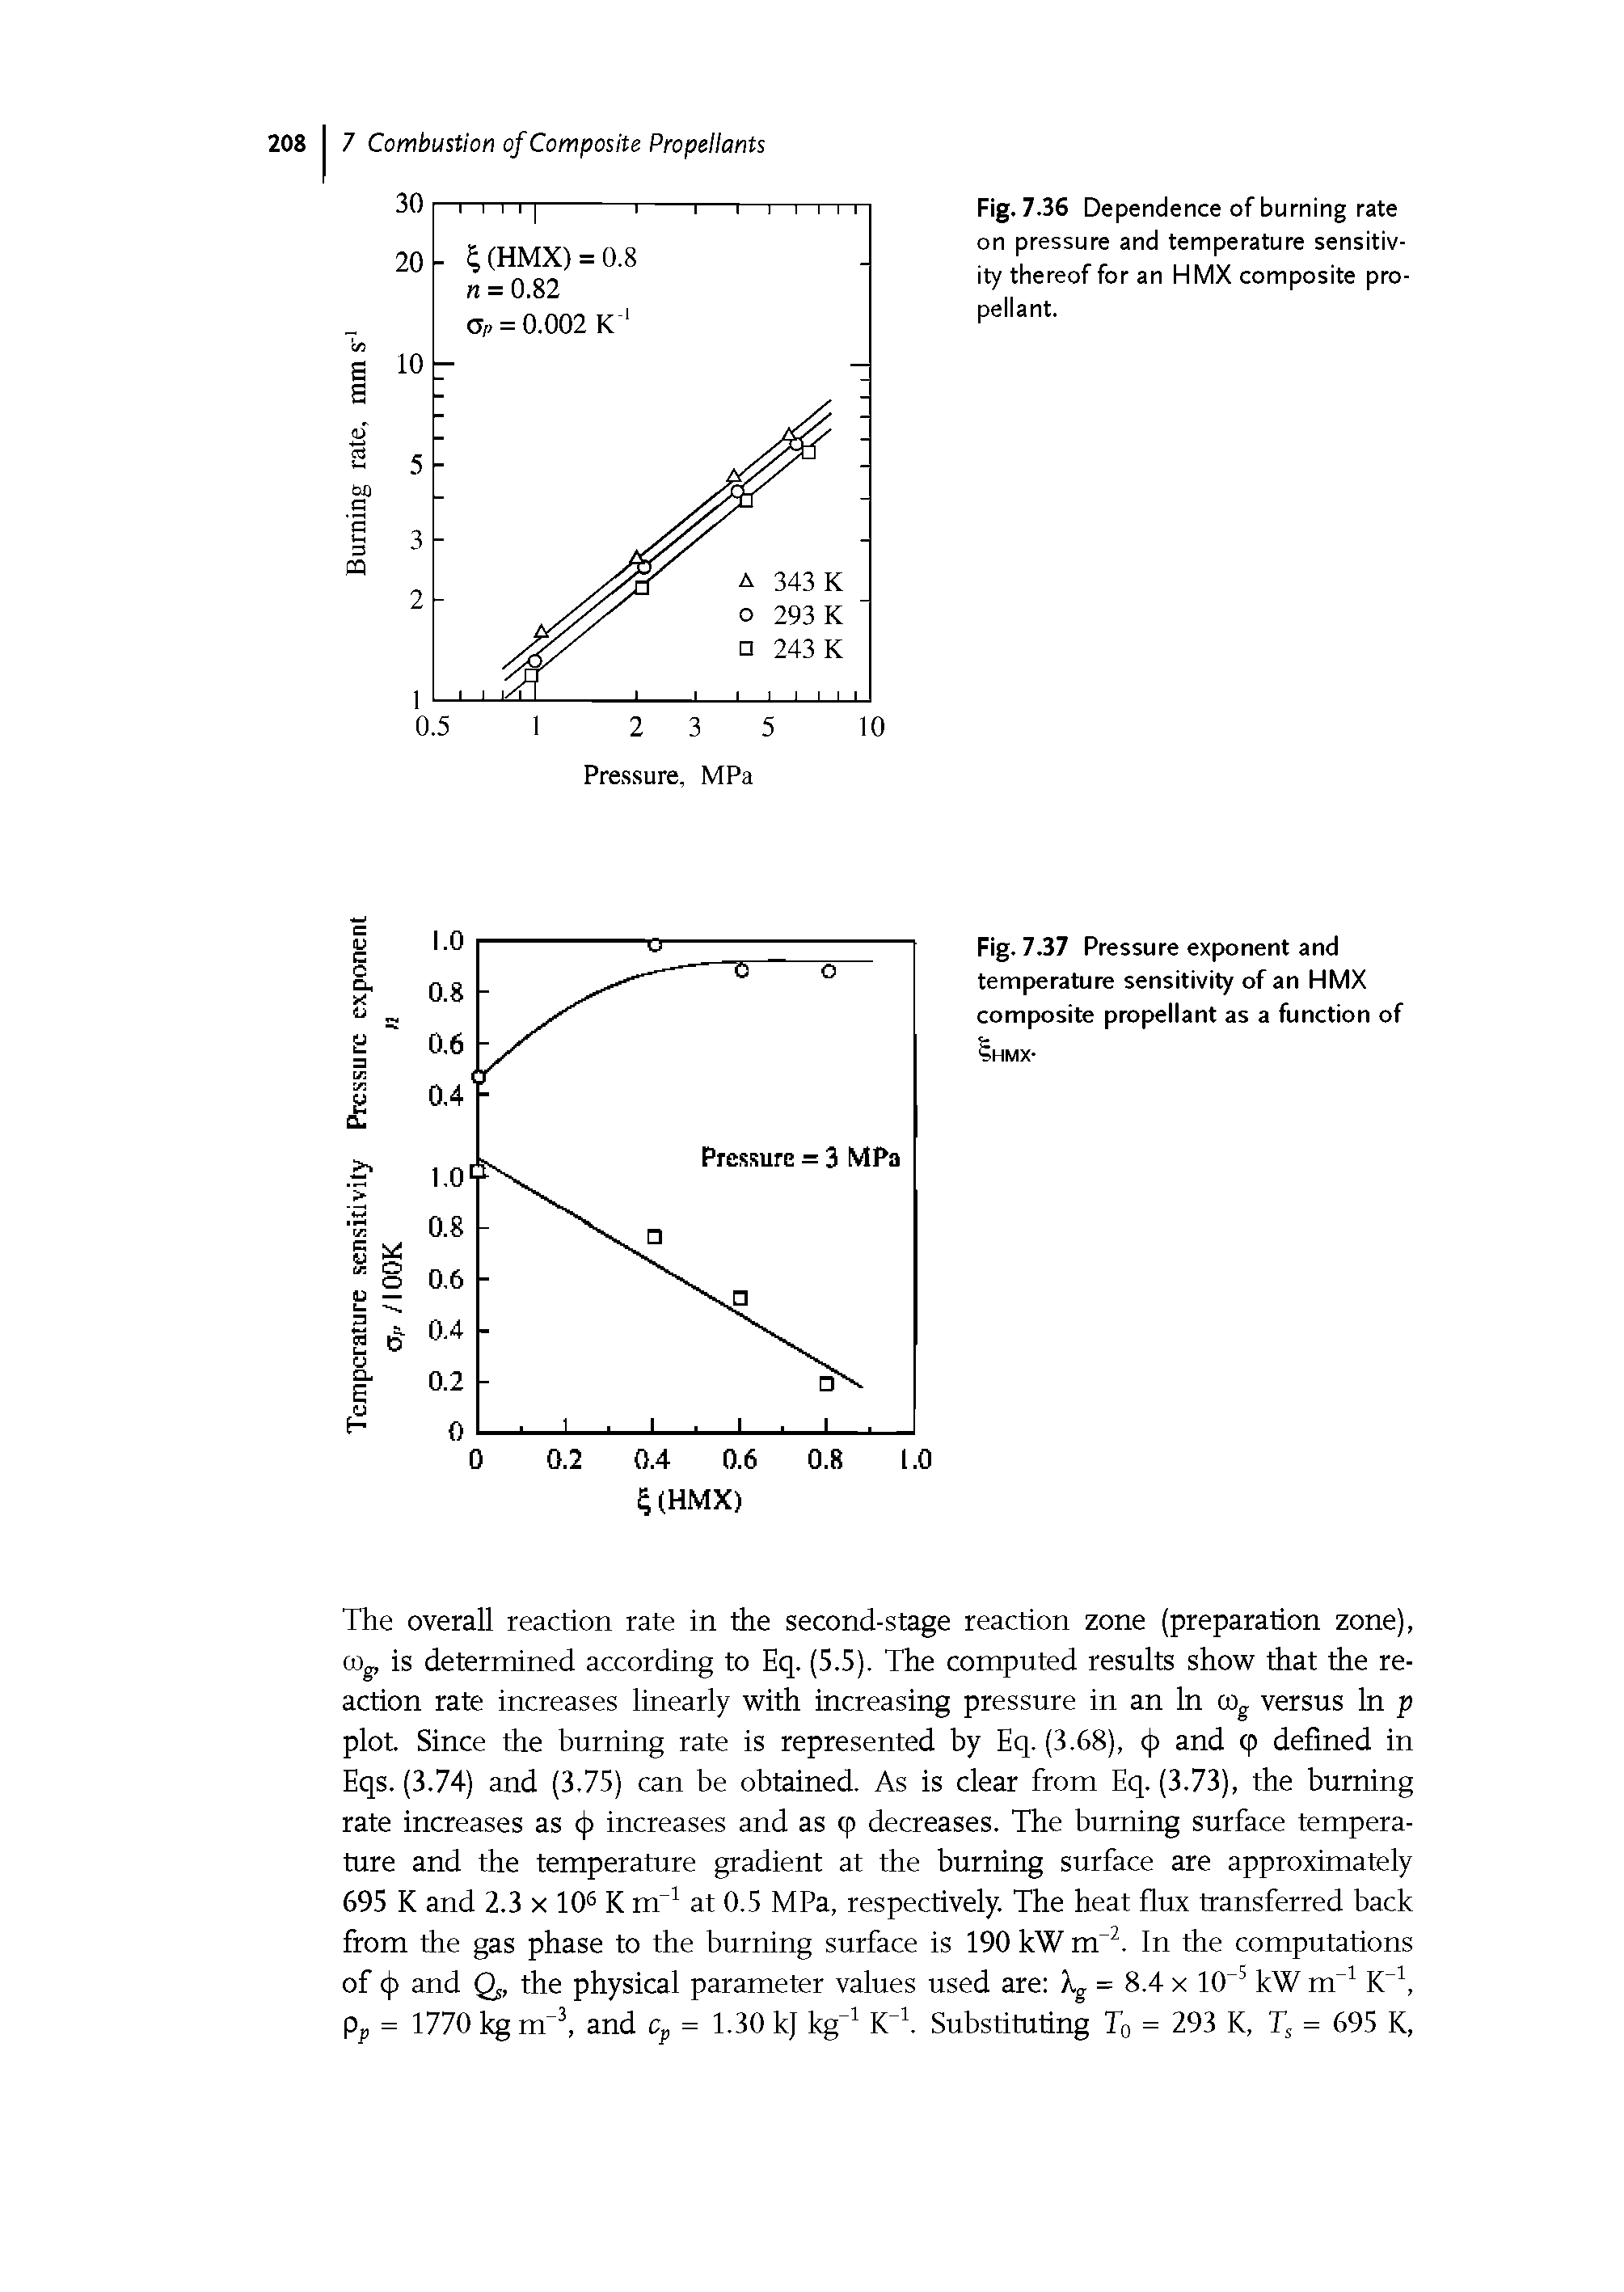 Fig. 7.36 Dependence of burning rate on pressure and temperature sensitivity thereof for an HMX composite propellant.